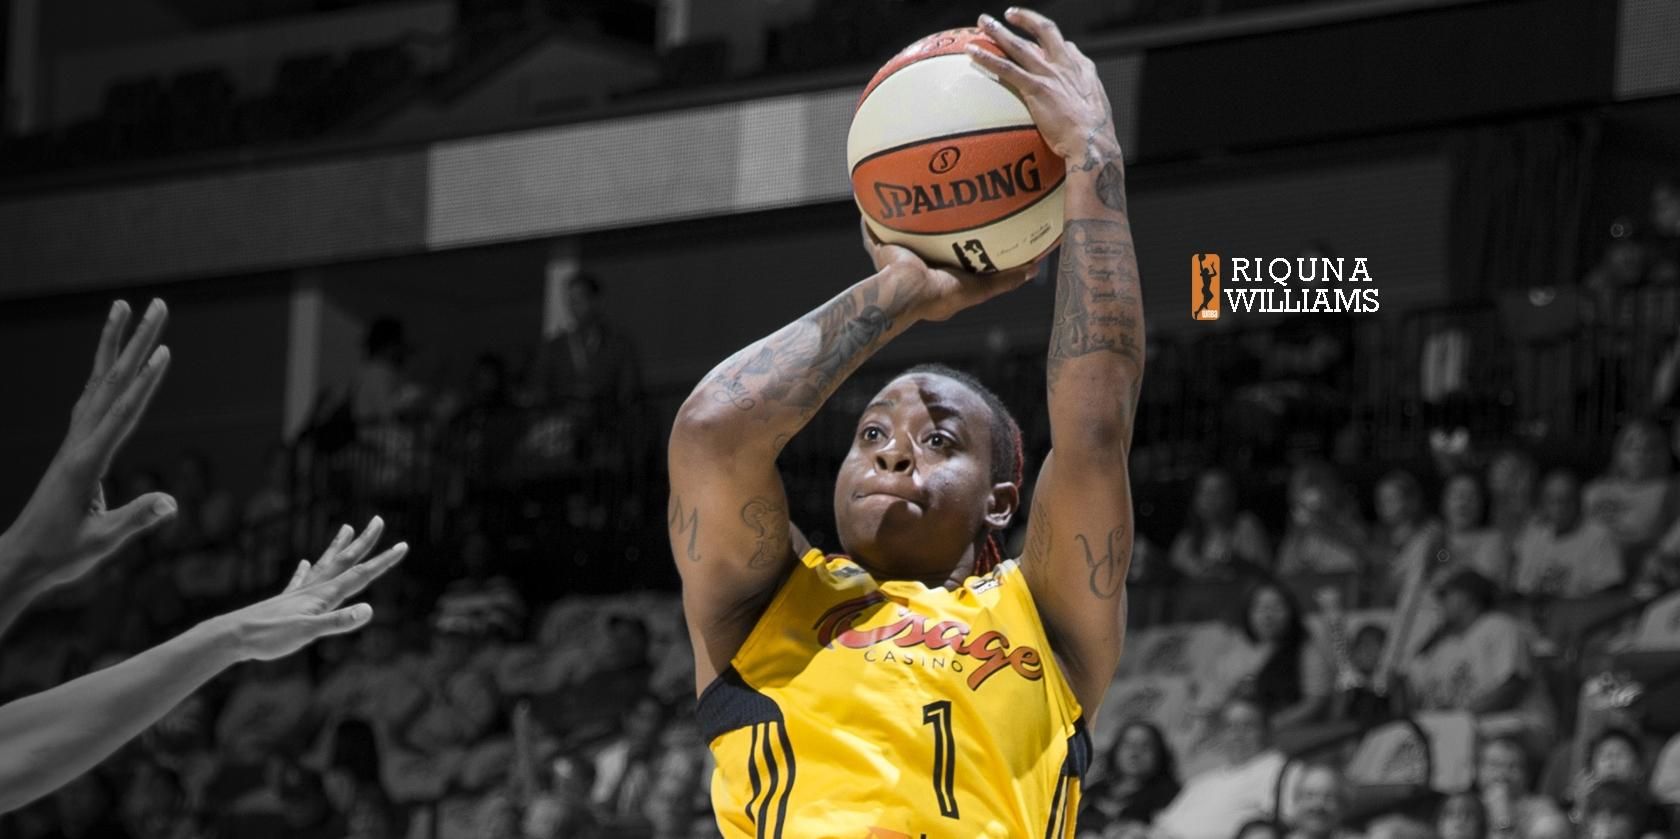 Williams Named WNBA Sixth Woman of the Year